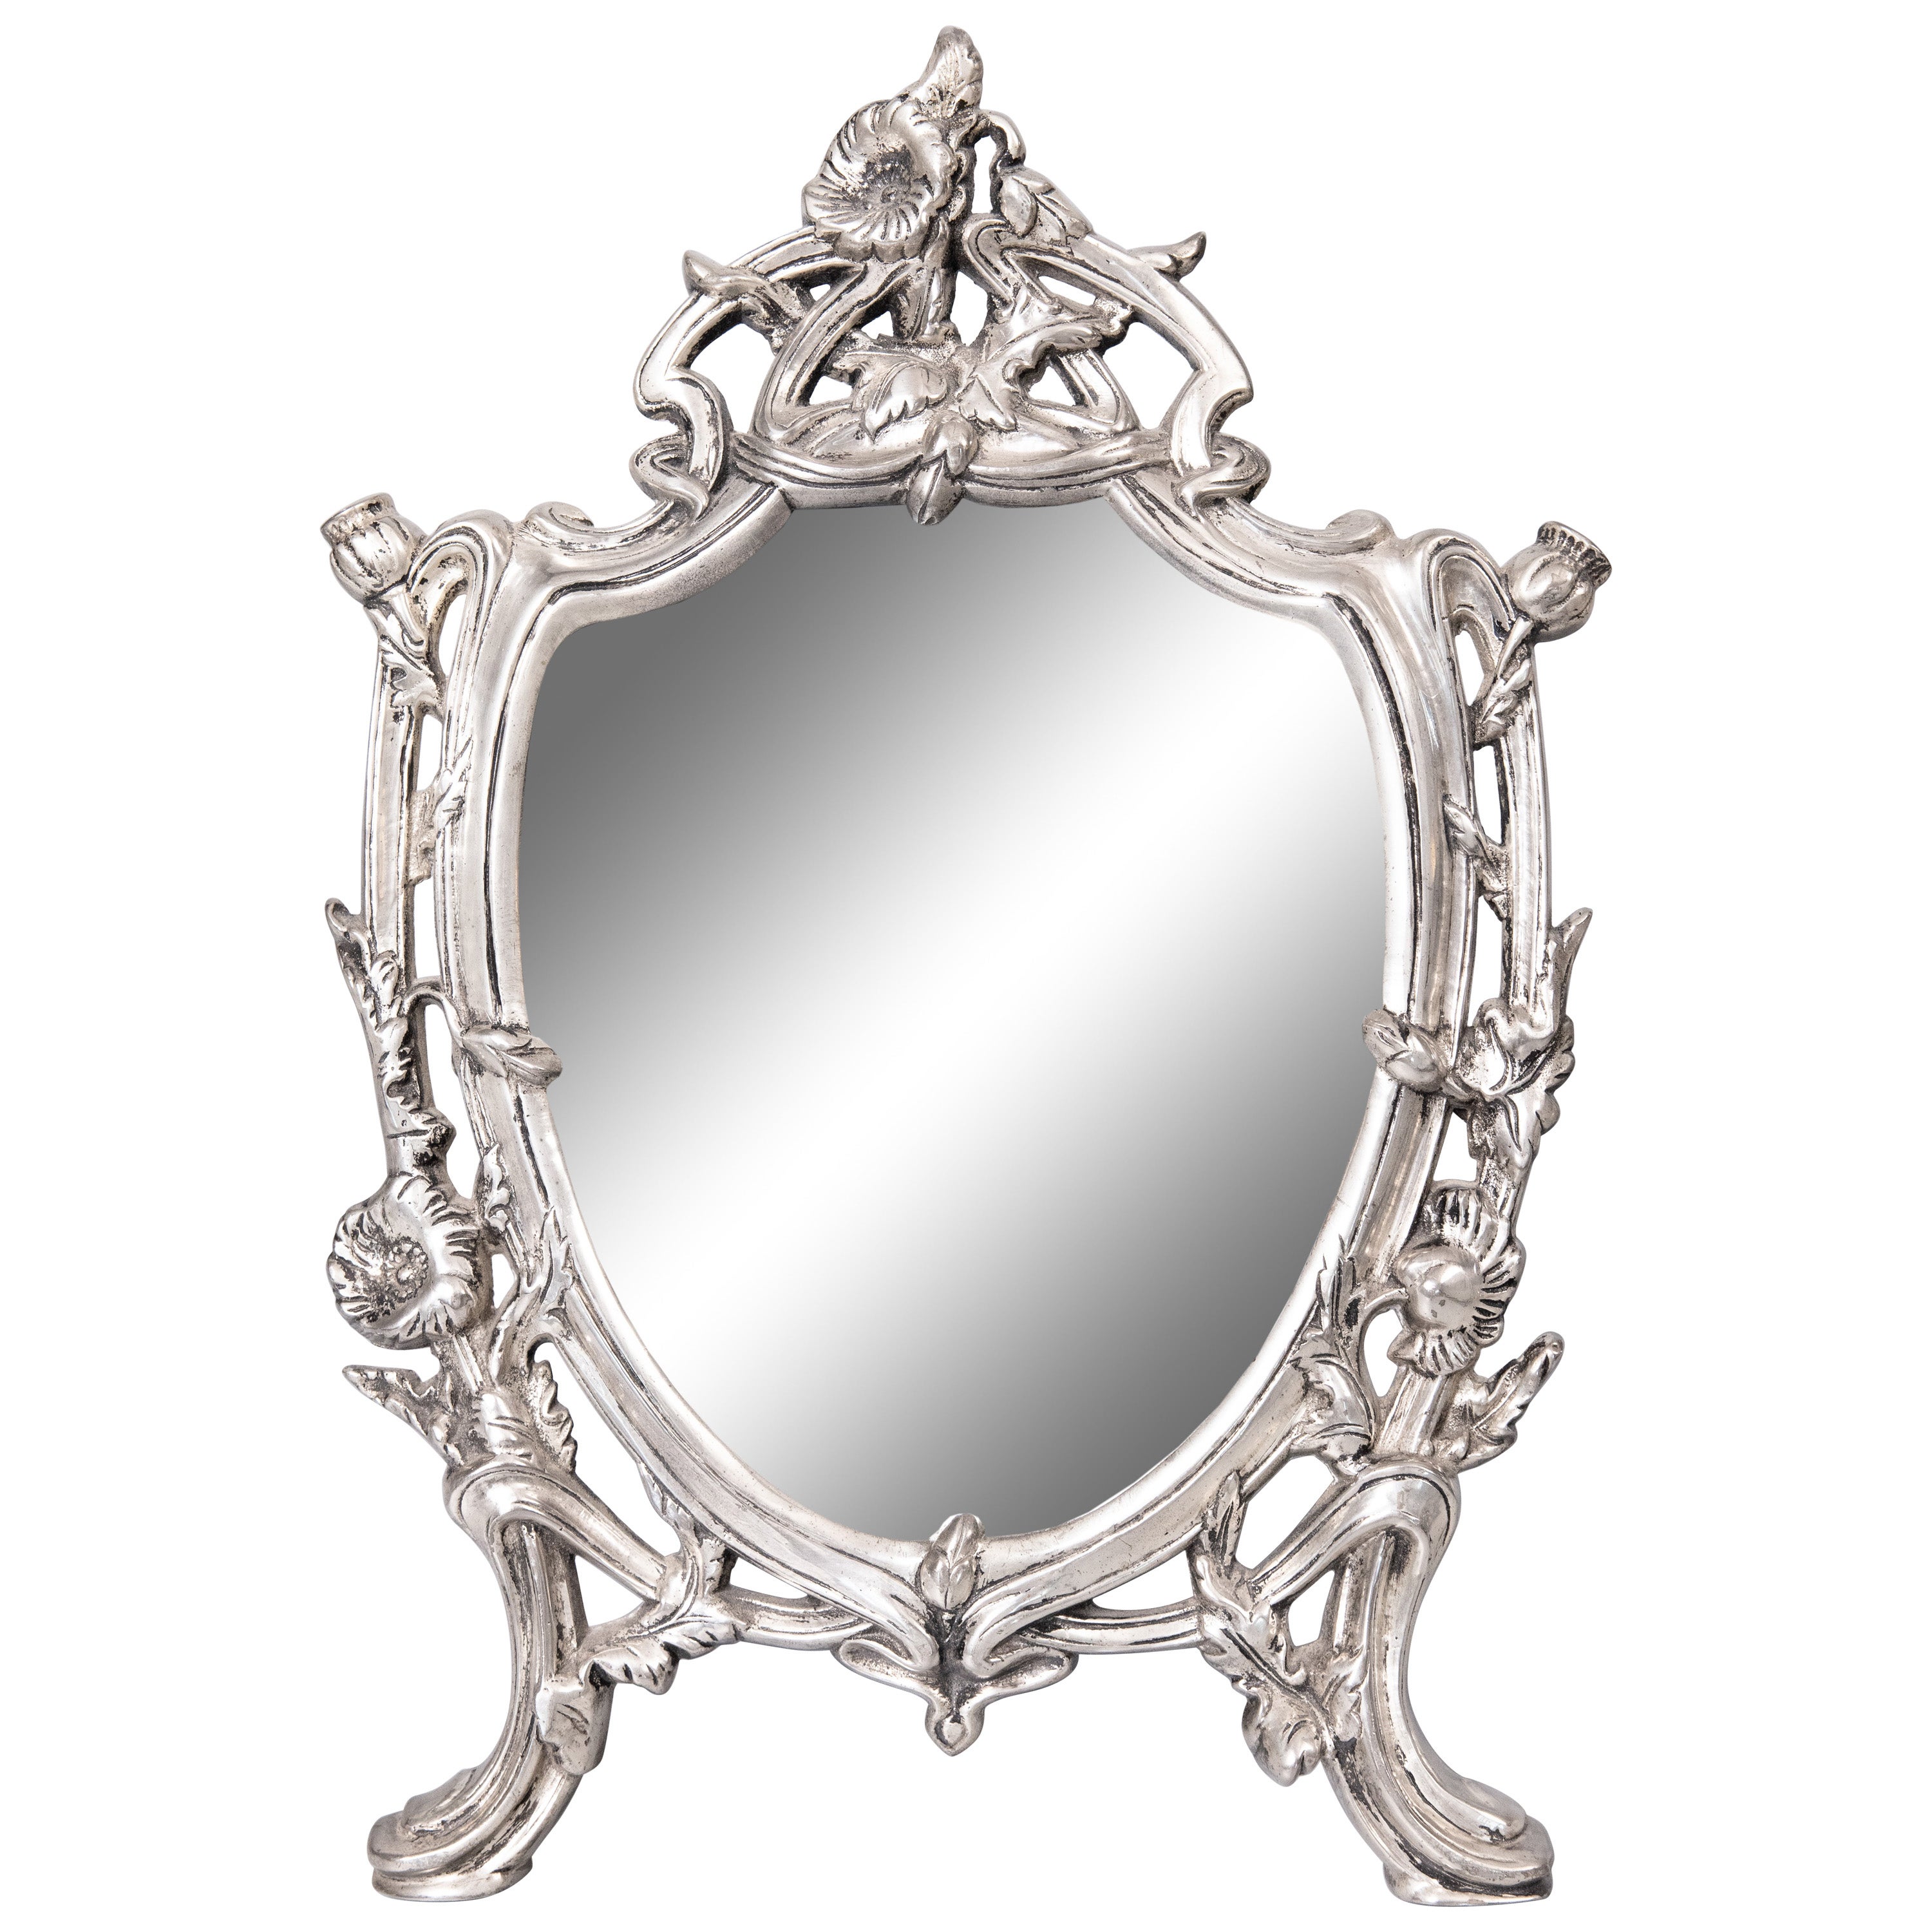 French Art Nouveau Silver Plate Dresser Vanity Table Easel Back Mirror, c. 1900 For Sale